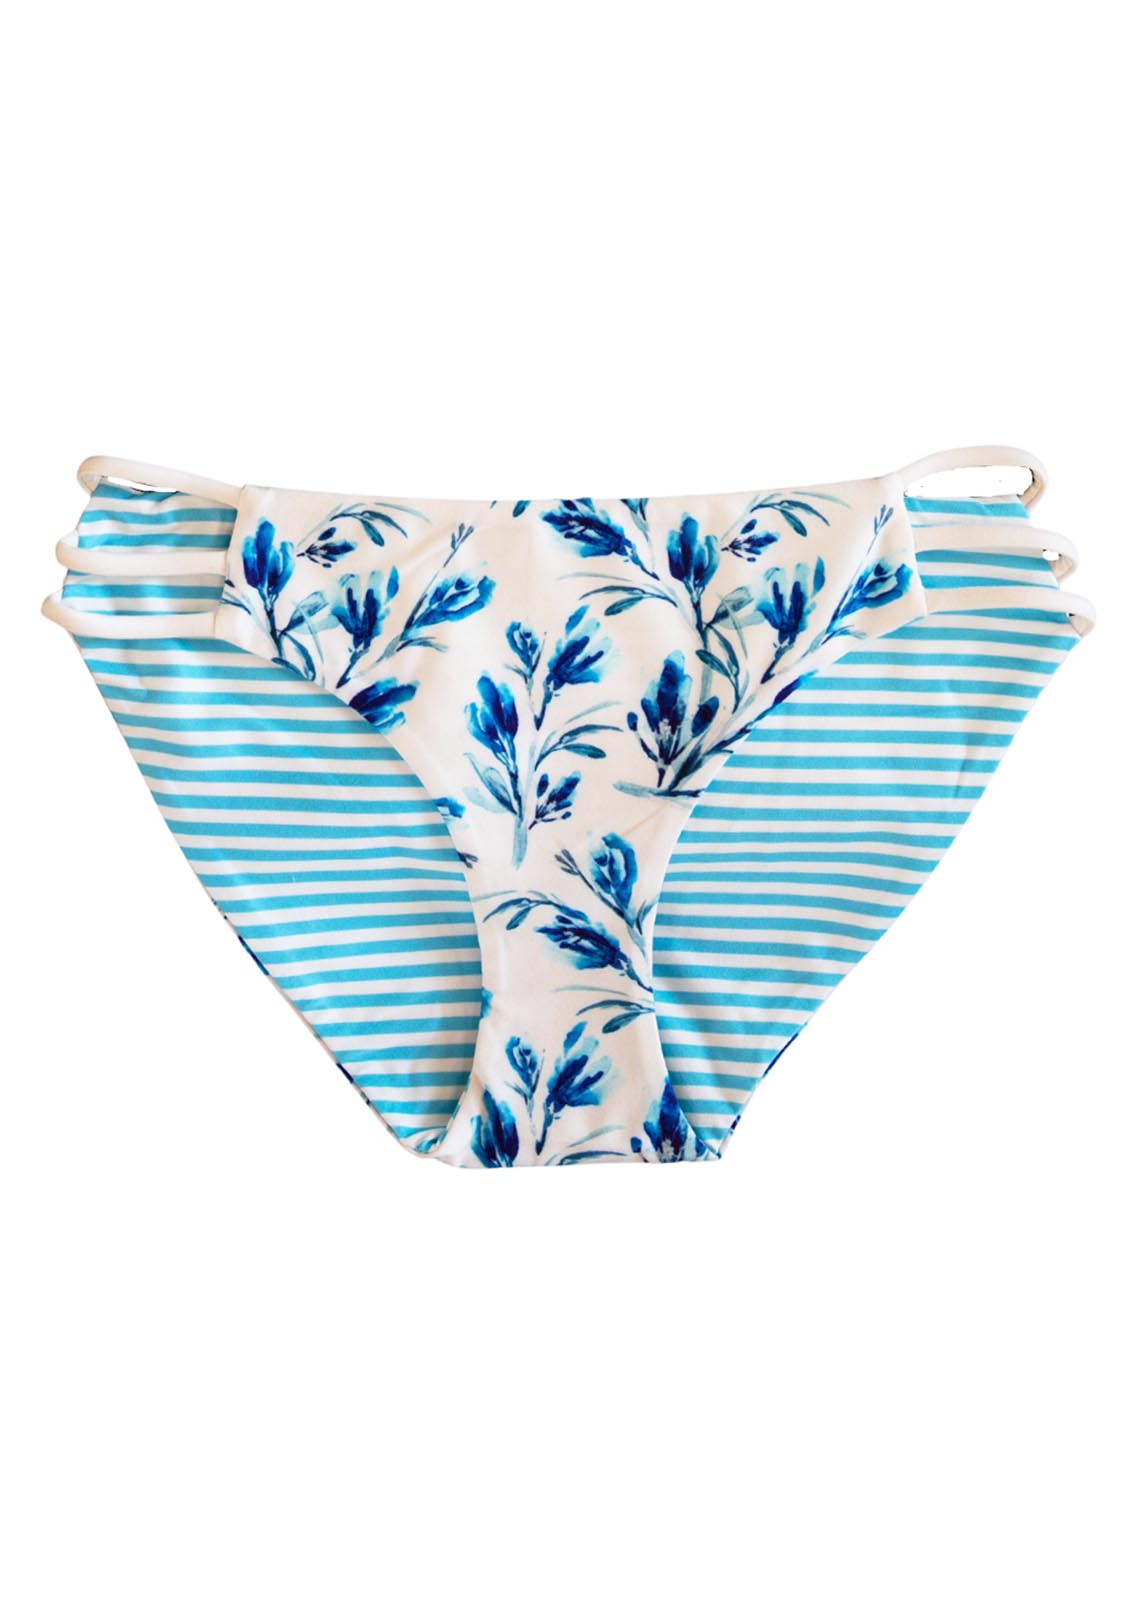 Women's and Teens' Swimsuit bottoms Full Coverage with reversible blue white flower print and stripes